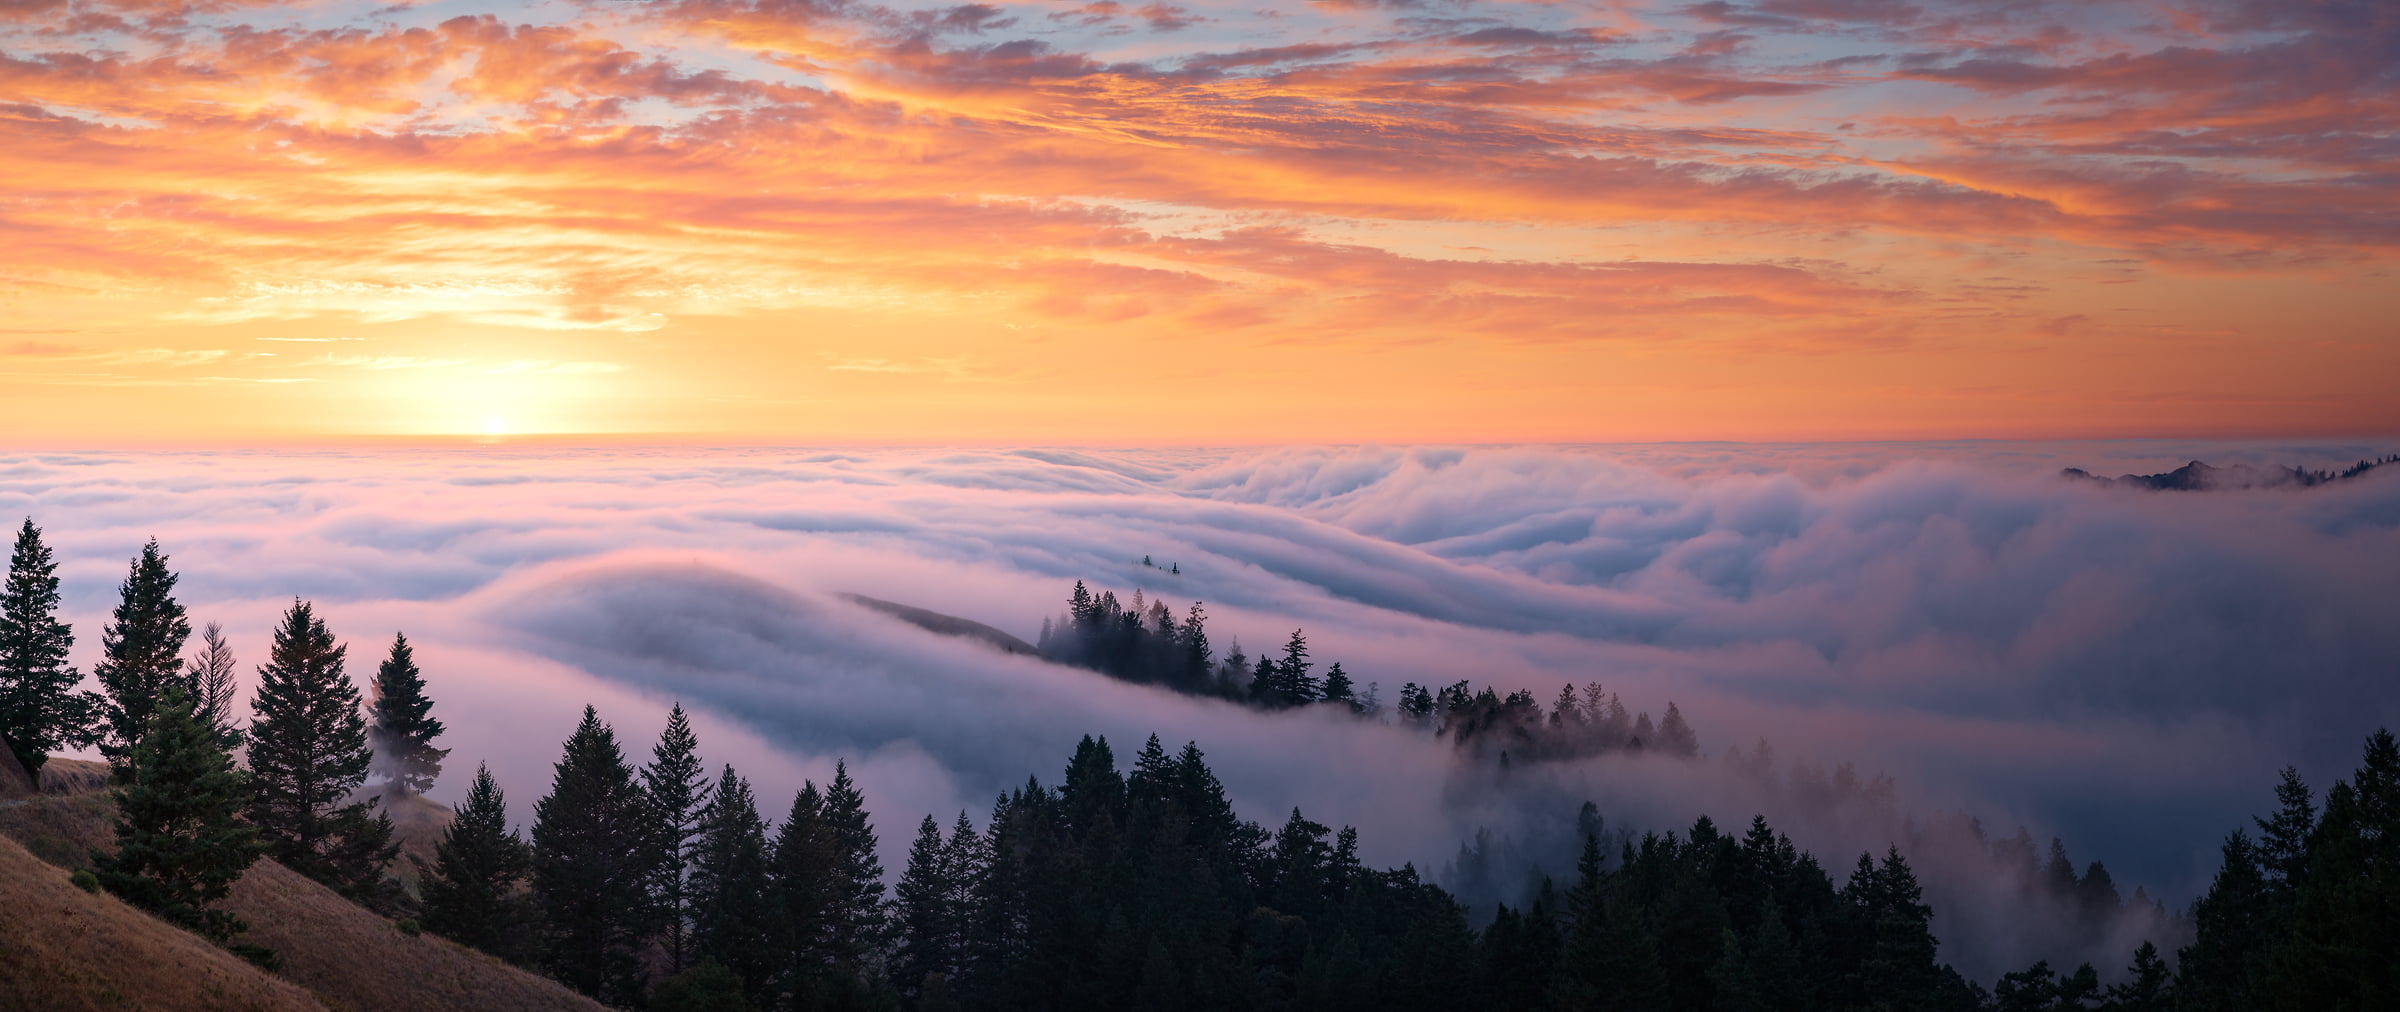 139 megapixels! A very high resolution, large-format VAST photo print of sunset above clouds and fog; landscape photograph created by Jeff Lewis in Mt. Tamalpais, California